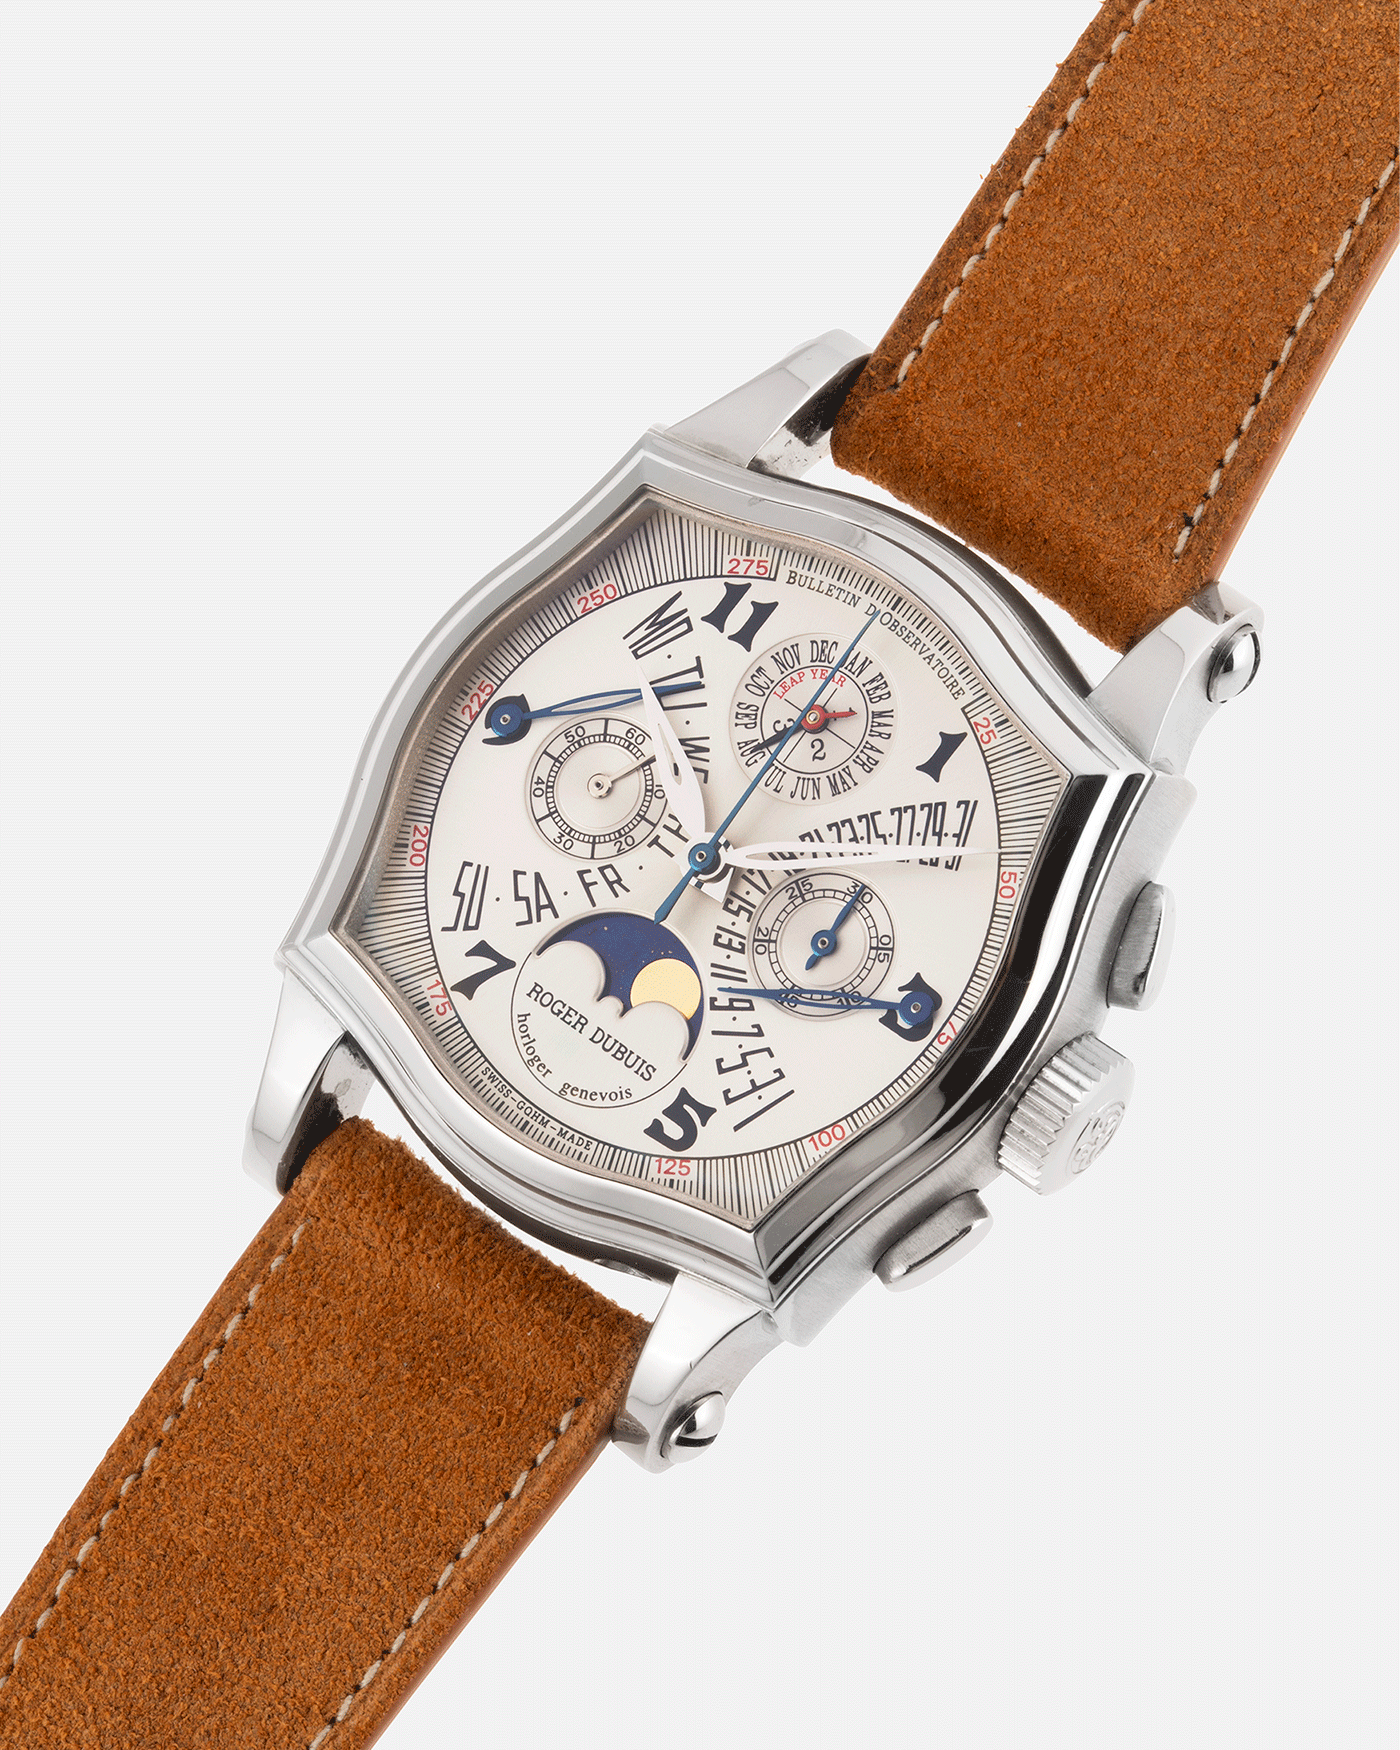 Brand: Roger Dubuis Year: 2000’s Model: Sympathie 37 Perpetual Chronograph Material: 18k White Gold Movement: Cal RD 5637 Case Diameter: 37mm Strap: Nostime Sand Tan Suede Calf with 18k White Gold Roger Dubuis Tang Buckle